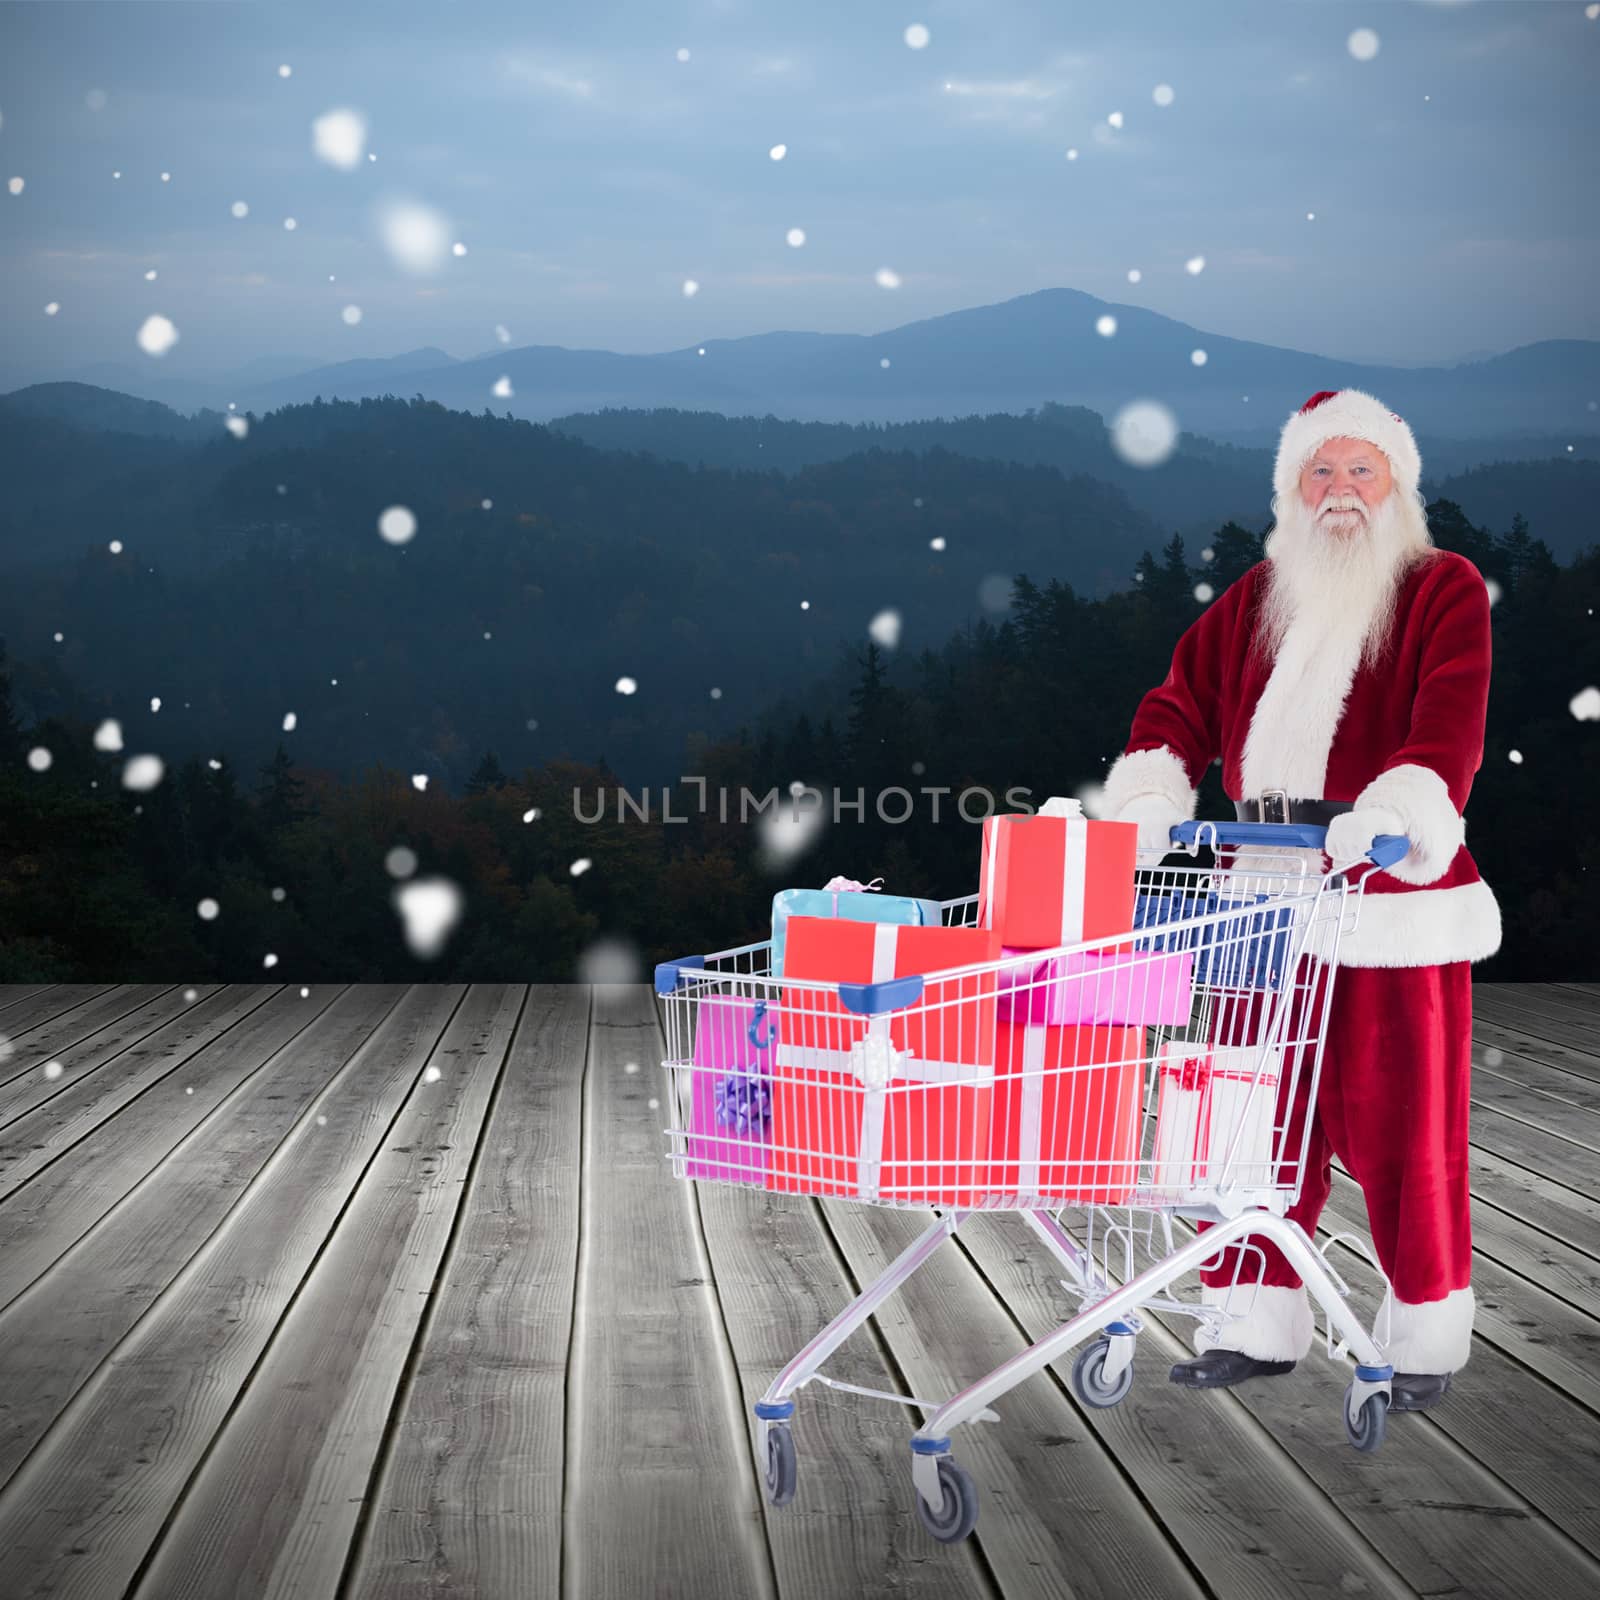 Santa delivering gifts from cart against wooden planks against mountains